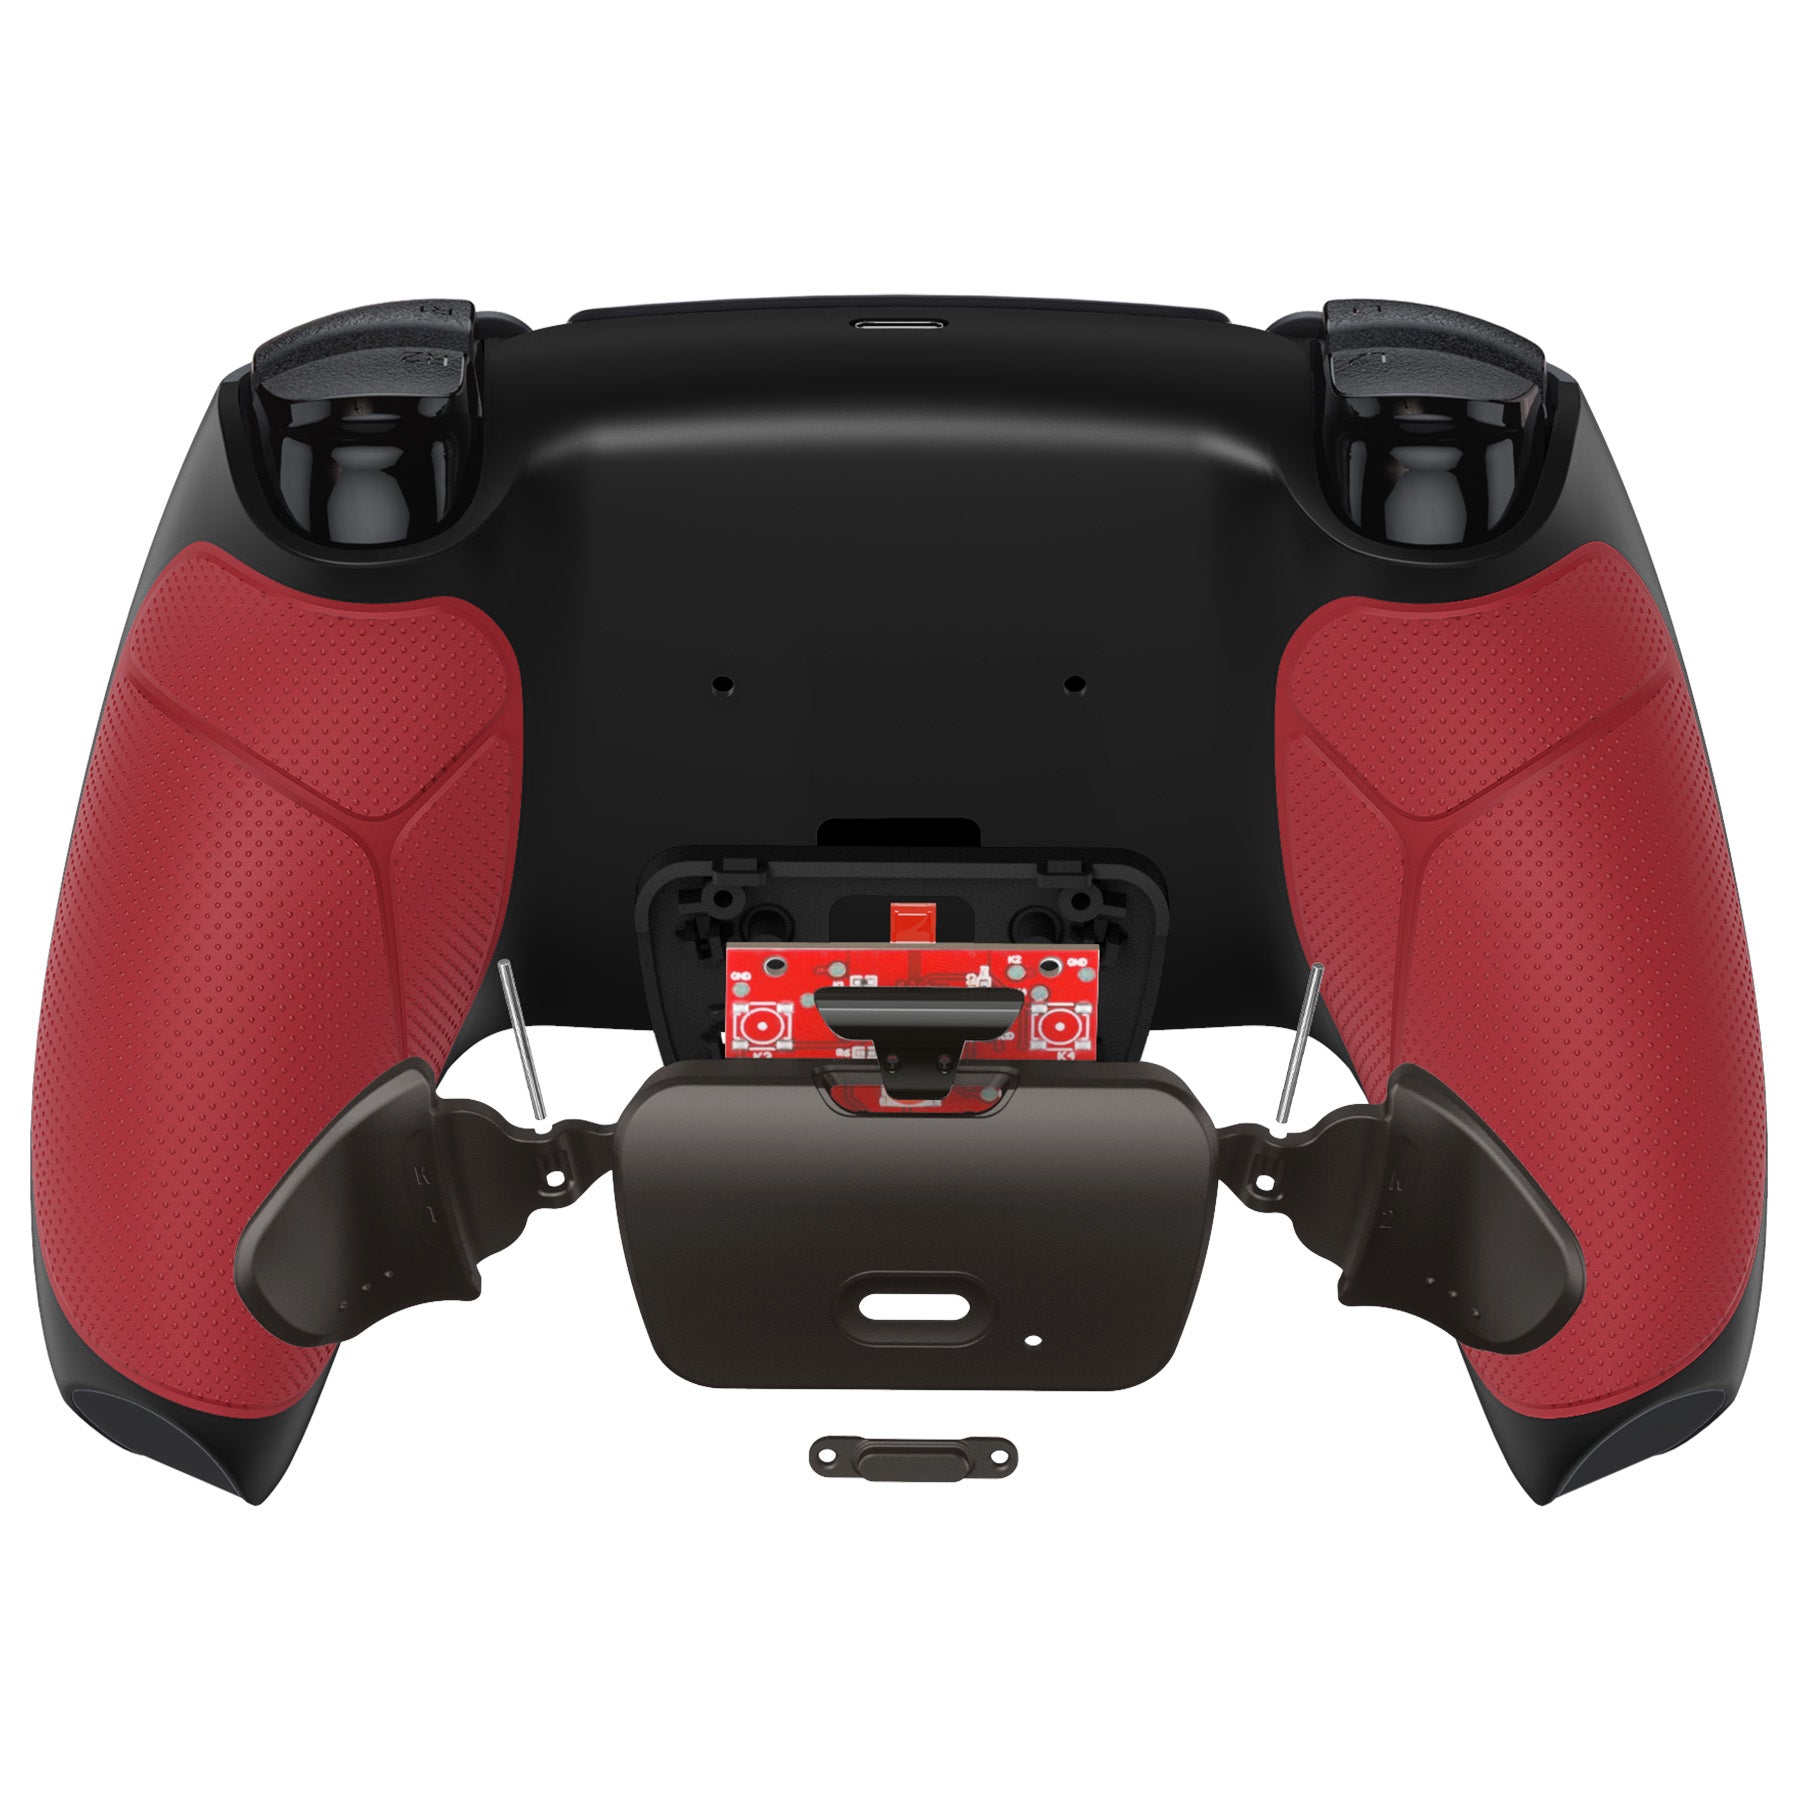 eXtremeRate Retail Black Real Metal Buttons (RMB) Version RISE 2.0 Remap Kit with Red Rubberized Grip Back Shell & Upgraded Remappable Back Buttons Attachment for PS5 Controller BDM-010 & BDM-020 - XPFJ7009